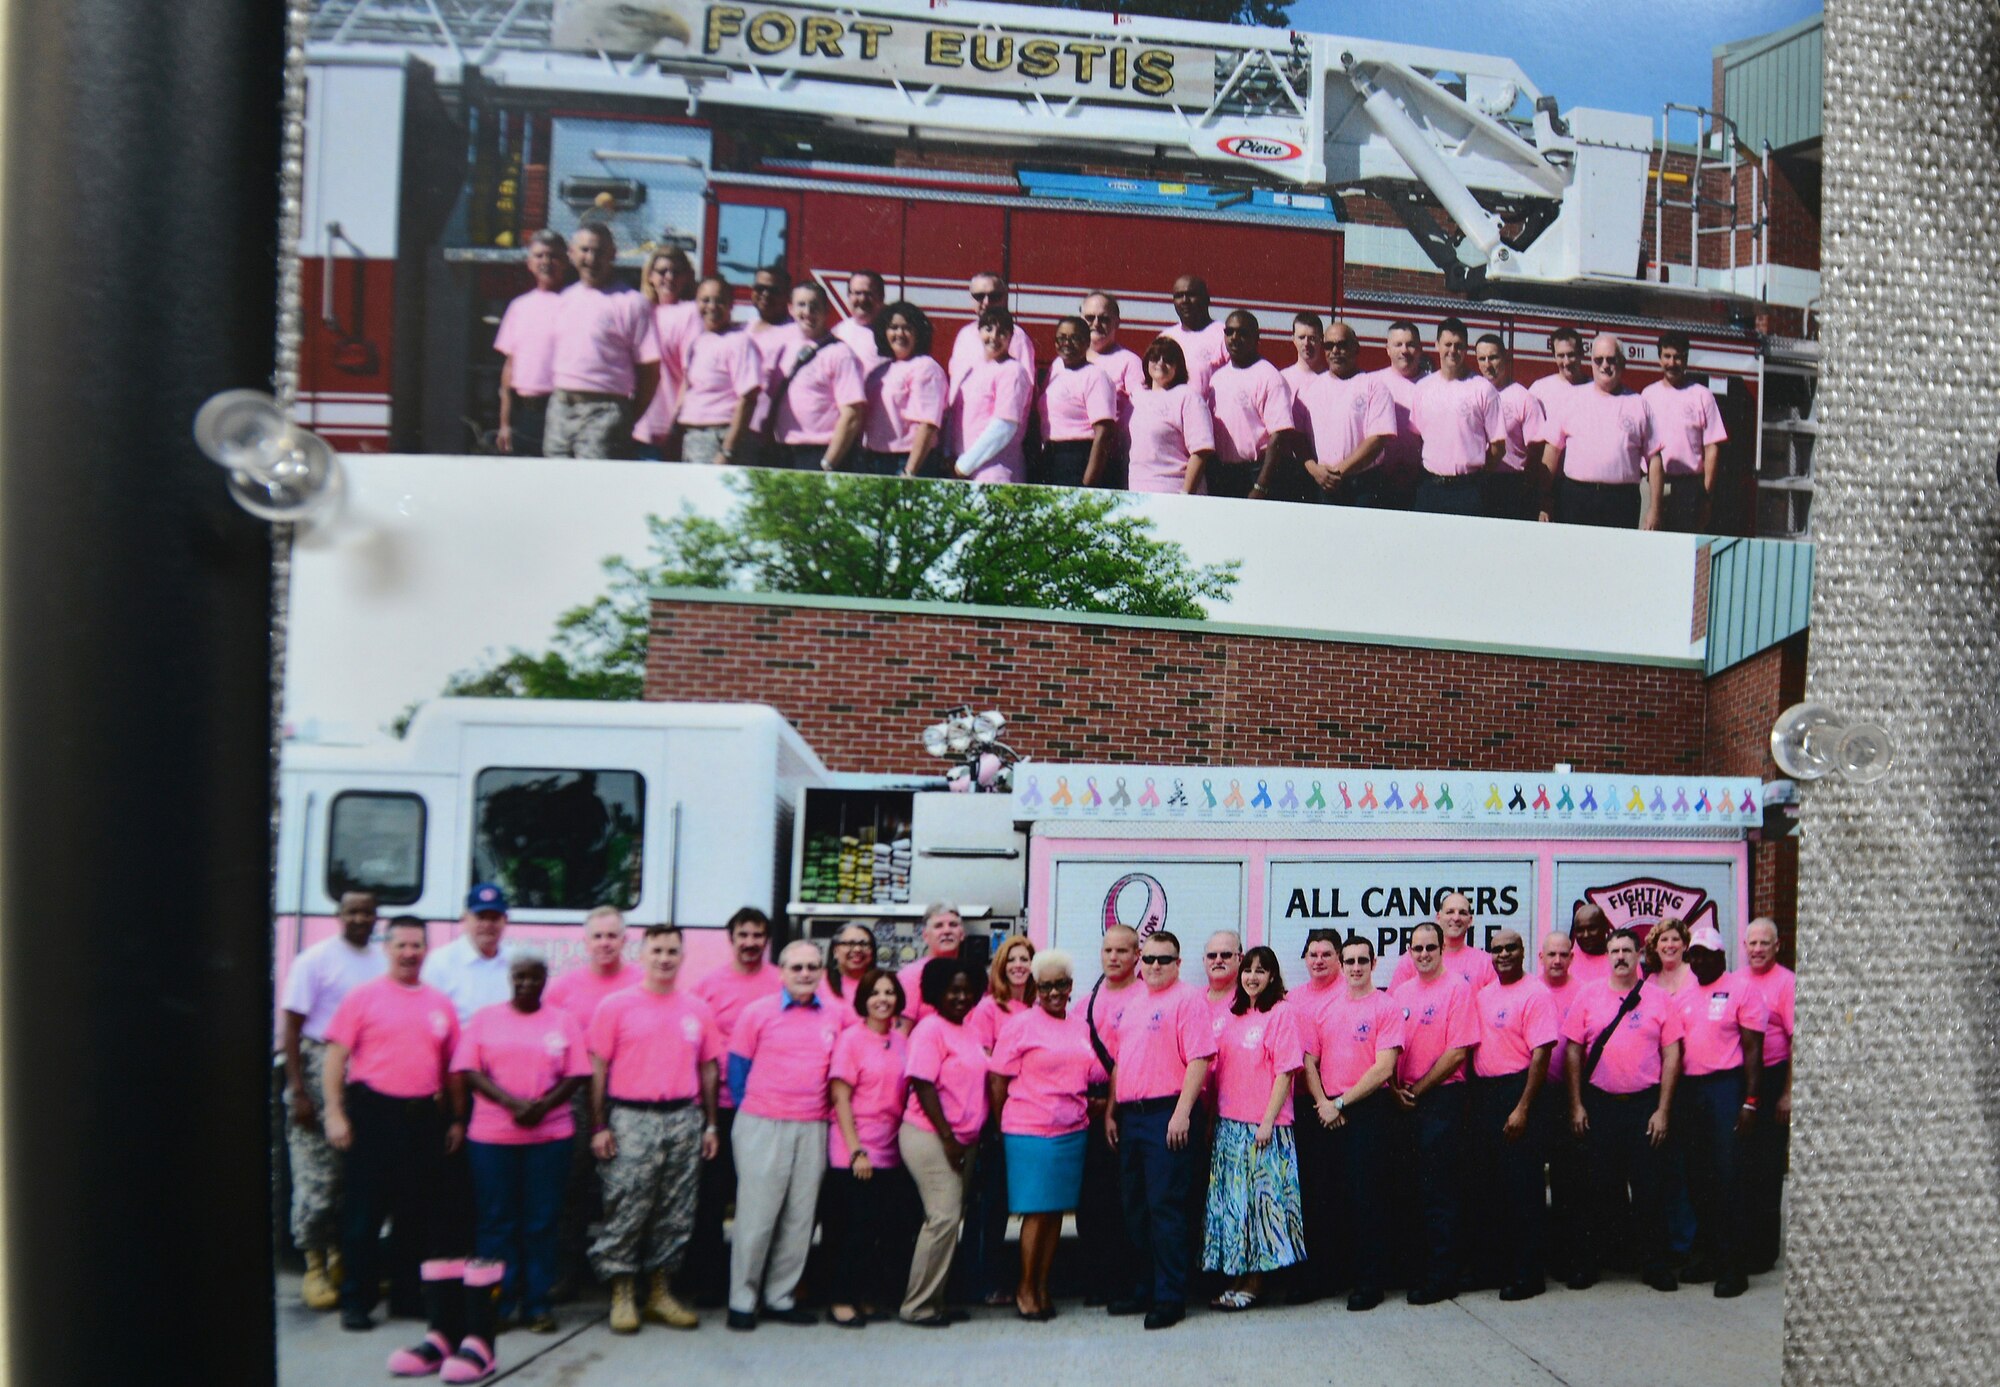 Donna Haynes, 733rd Civil Engineer Division environmental programs assistant, participates nearly every year in the Fort Eustis Fire Department’s annual Breast Cancer Awareness Month photo at Fort Eustis, Va. The fire department wears pink shirts throughout October to bring awareness to the month’s campaign. This year, the department wears the shirts in honor of Haynes, who was recently diagnosed with Stage 1 breast cancer. (U.S. Air Force photo by Staff Sgt. Natasha Stannard/Released)